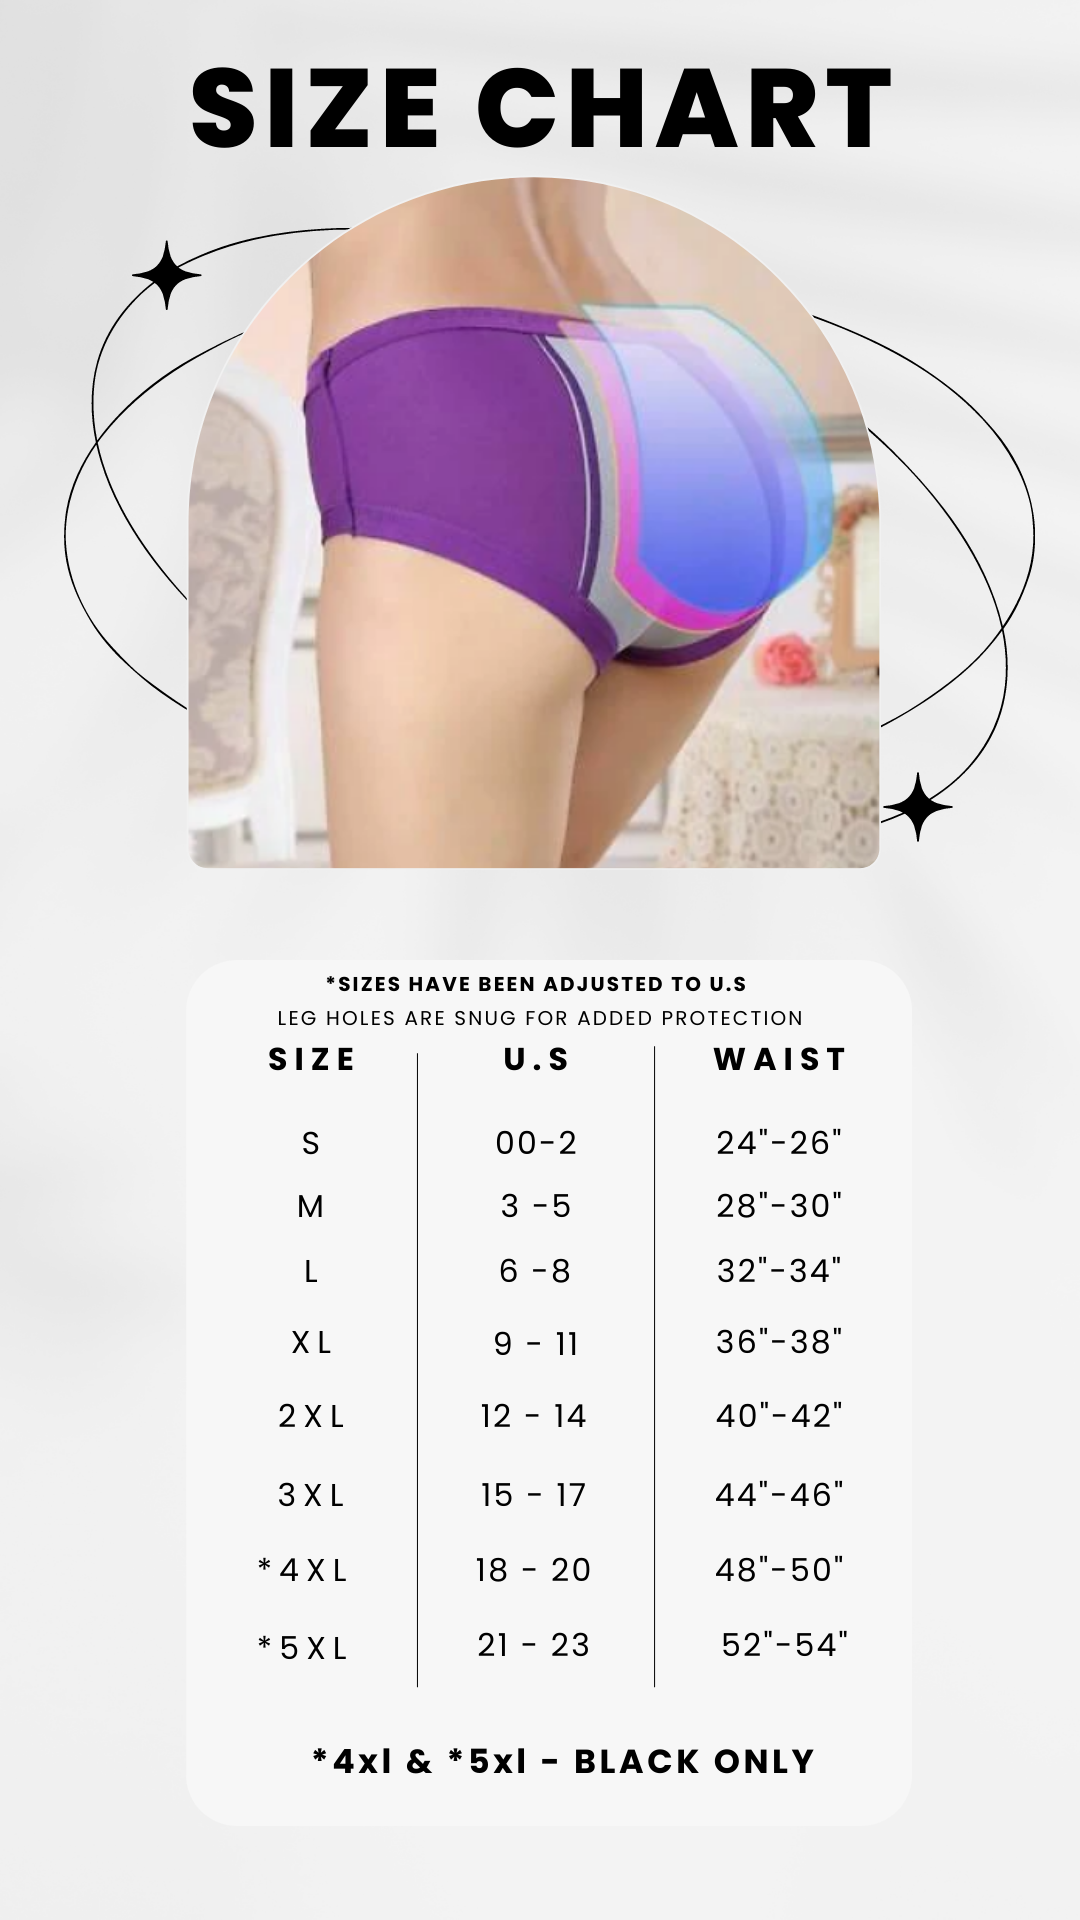 3 Pcs Leak Proof Menstrual Period Panties Cotton Absorb Urinary Briefs  Washable Reusable Women Underwear Plus Size High Waisted Knickers Women